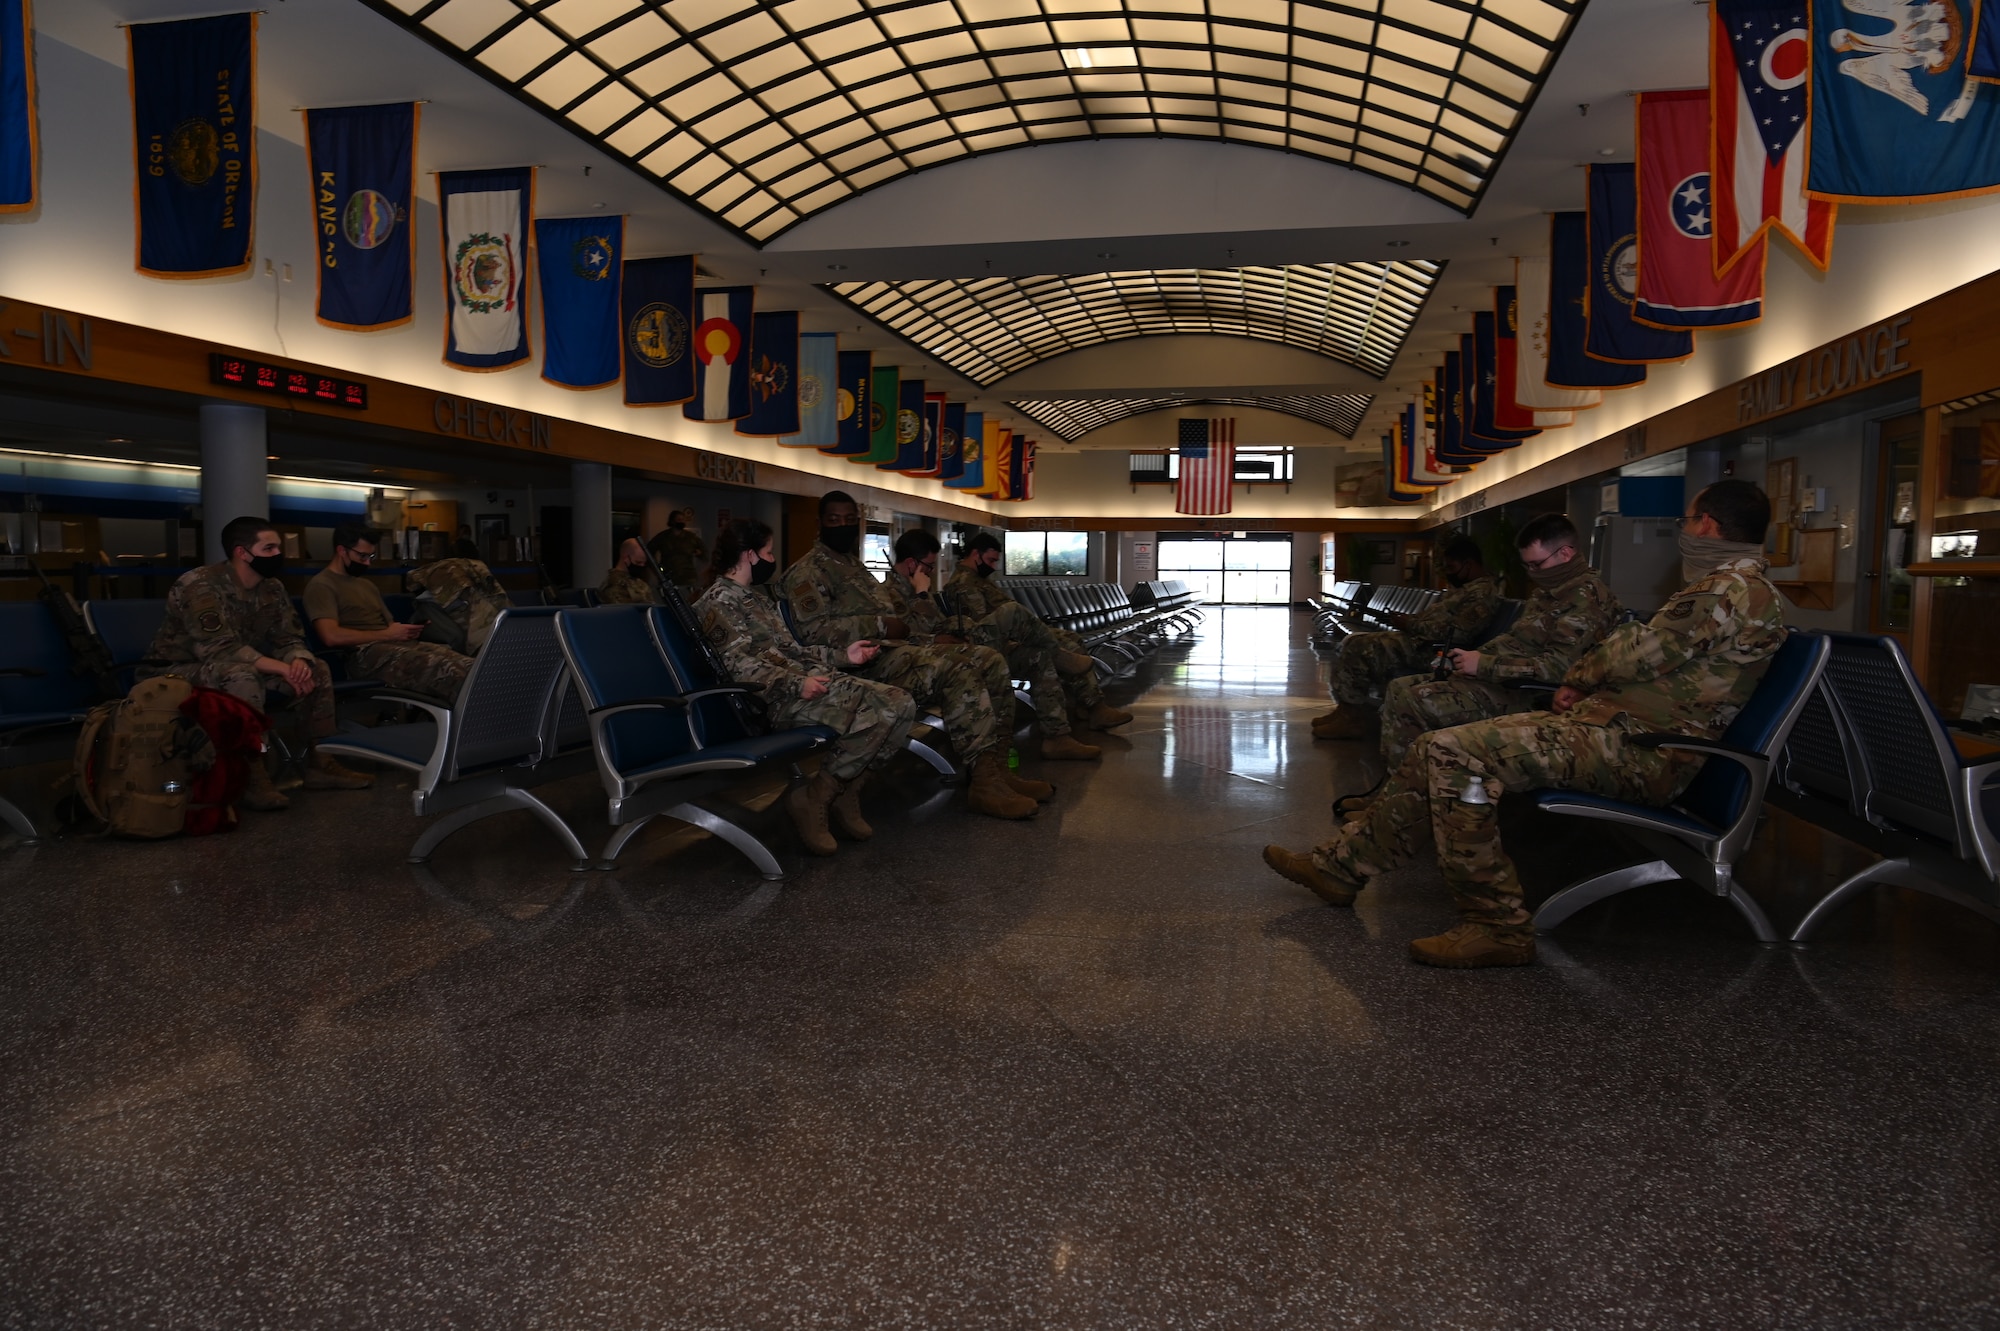 U.S Airmen assigned to the 621st Contingency Response Group prepare to depart from the airport terminal Aug. 14, 2021, at Joint Base McGuire-Dix-Lakehurst, New Jersey.  The 621st CRW deployed Airmen from the 621st and 821st CRGs as well as the 621st Air Mobility Advisory Group to support the evacuation of American citizens, Special Immigration Visa applicants and other vulnerable Afghans from Afghanistan.  (U.S. Air Force photo by Tech. Sgt. Luther Mitchell Jr.)